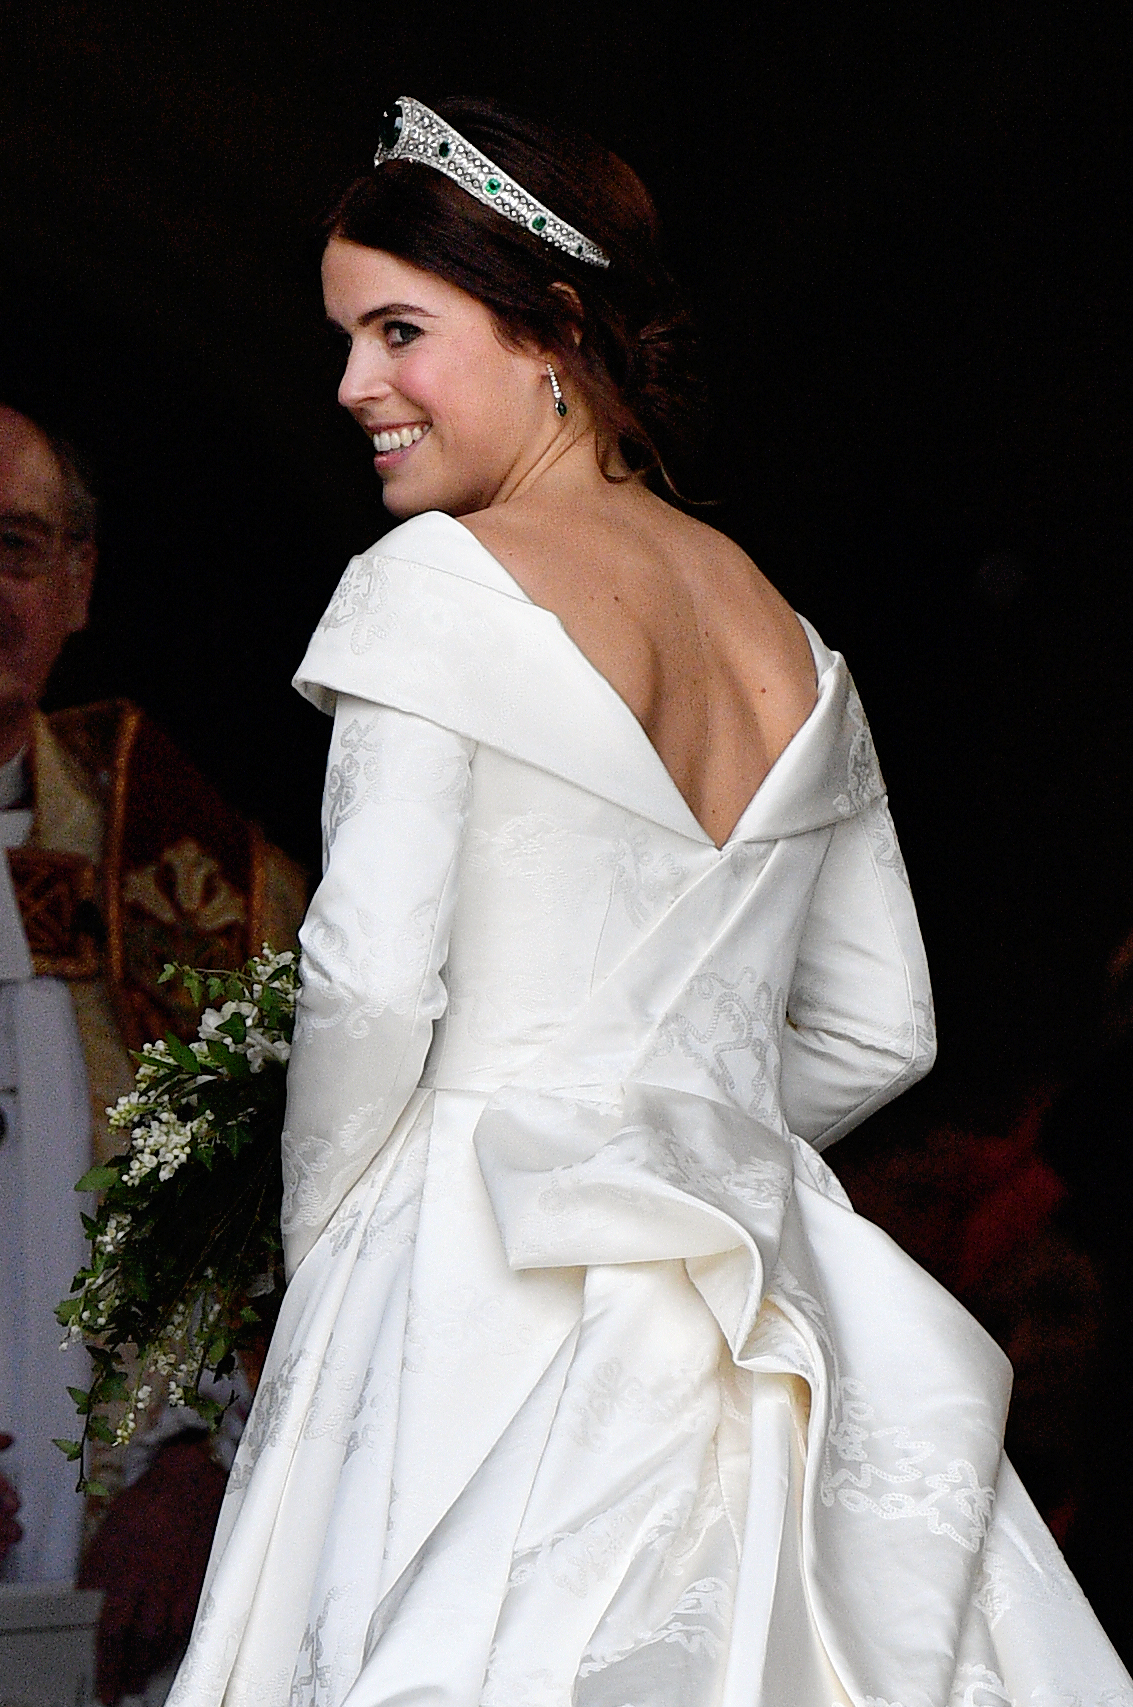 Princess Eugenie arrives at St. George's Chapel in Windsor, England before her wedding ceremony to Jack Brooksbank on October 12, 2018. | Source: Getty Images